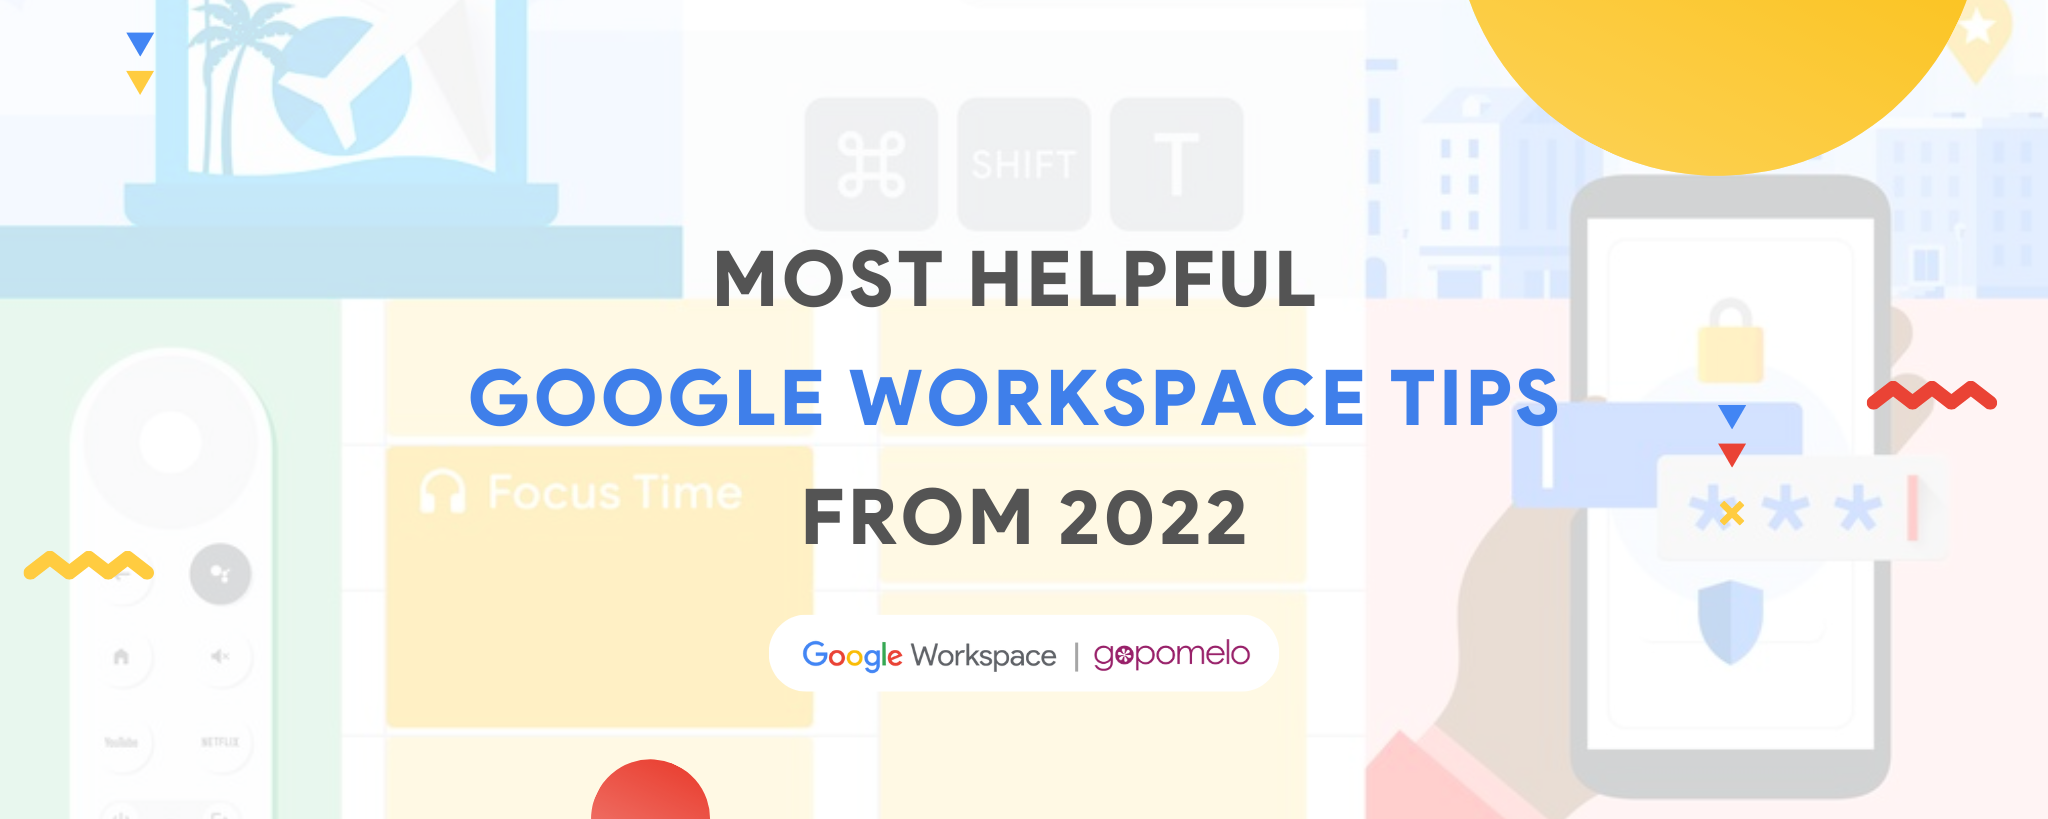 Most helpful Google Workspace tips from 2022 | GoPomelo